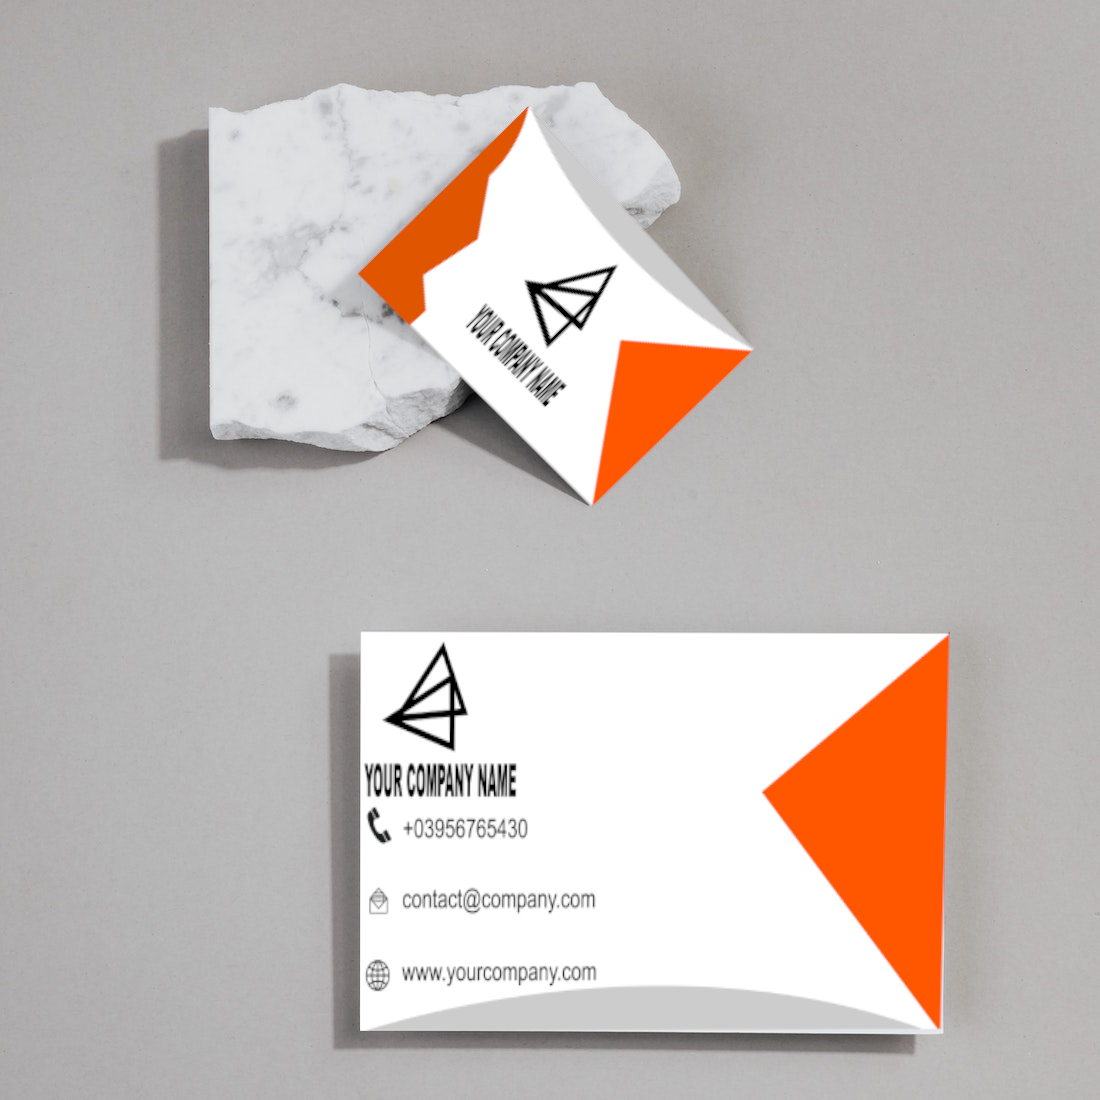 10 Editable Business Card Template, white and orange.